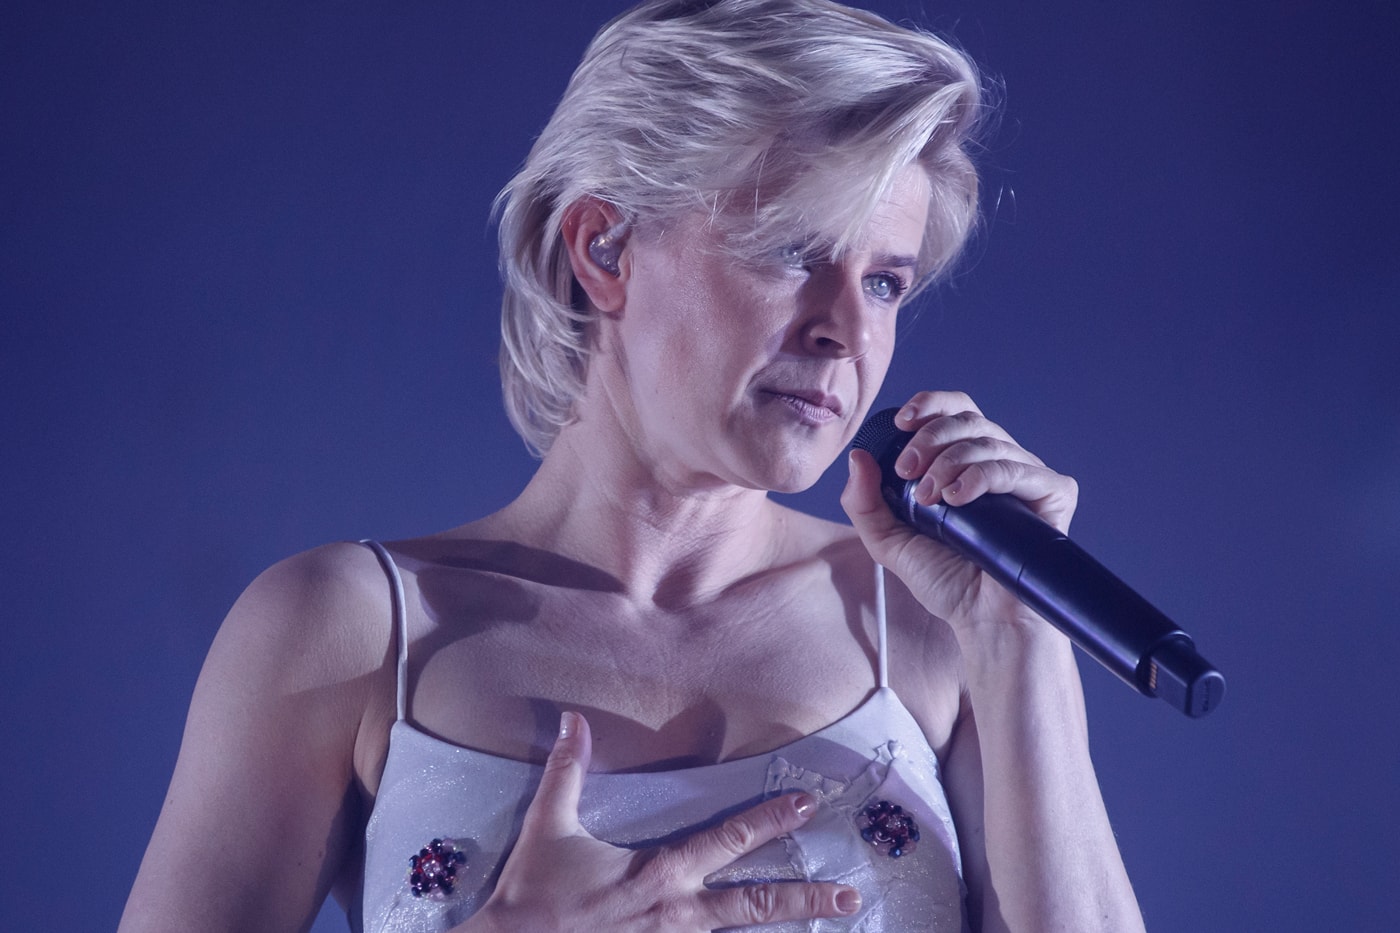 Robyn - Dancing On My Own & Indestructible (Live @ Nobel Peace Prize Awards)